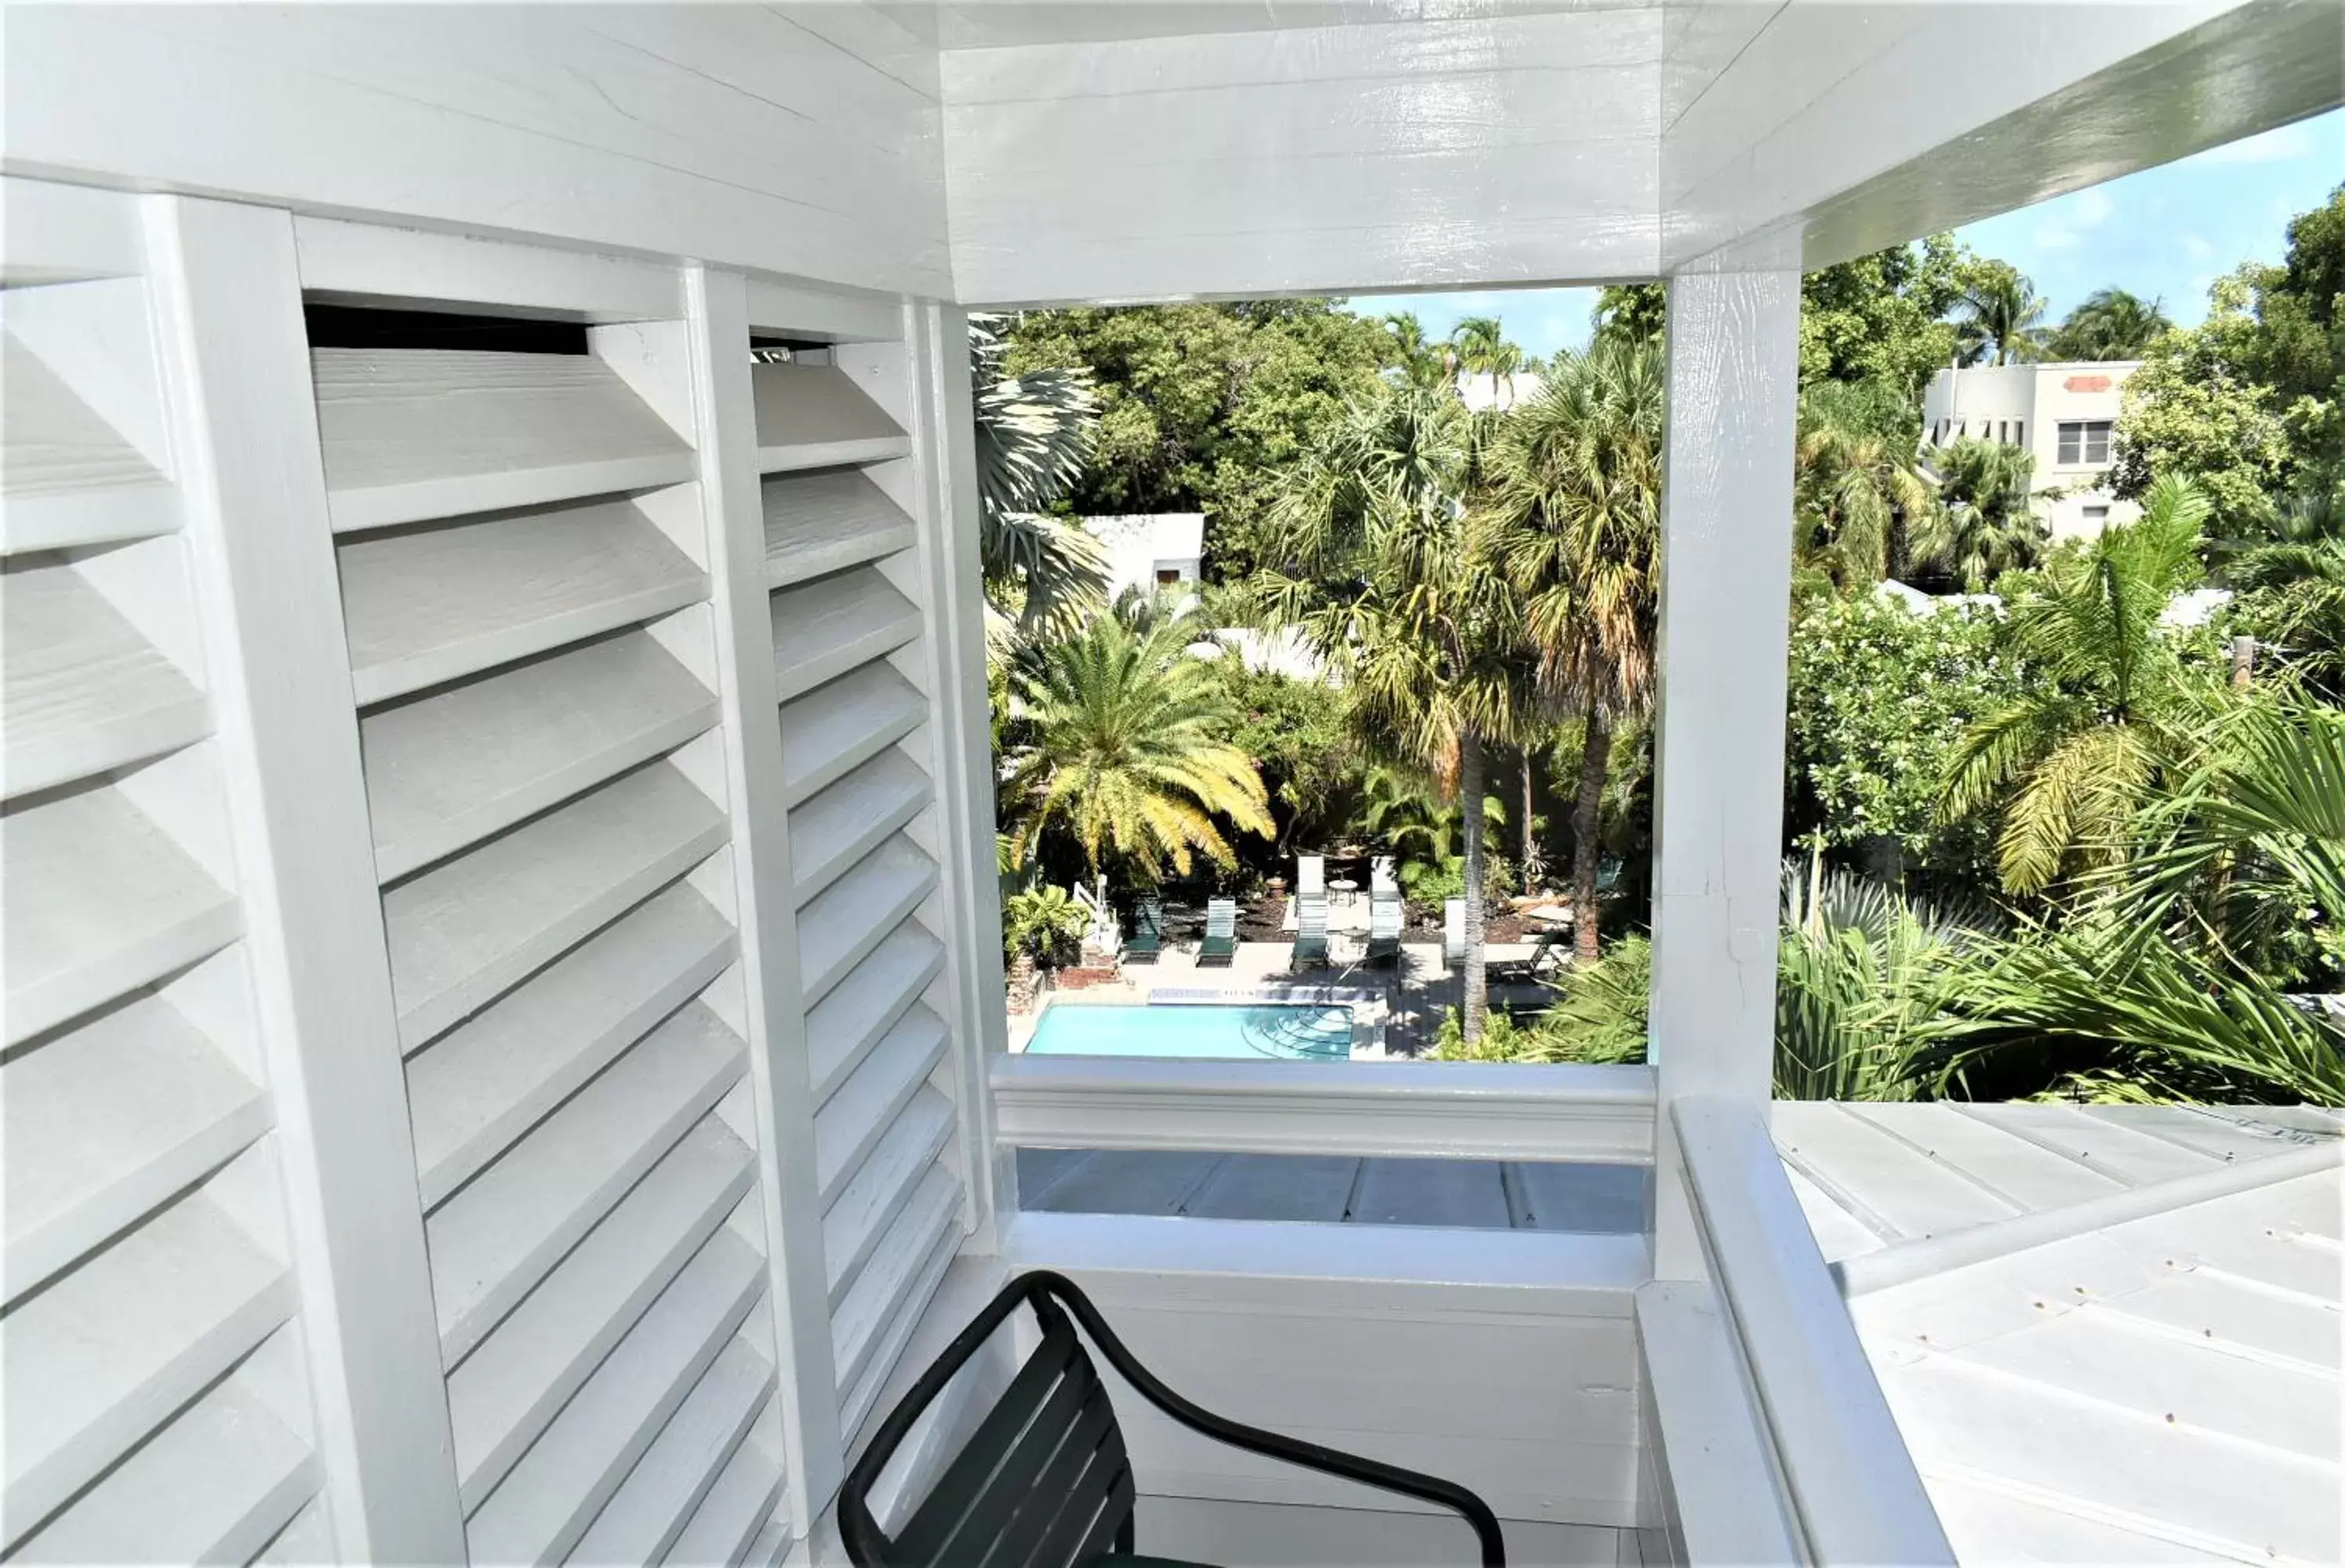 Balcony/Terrace, Pool View in Simonton Court Historic Inn & Cottages